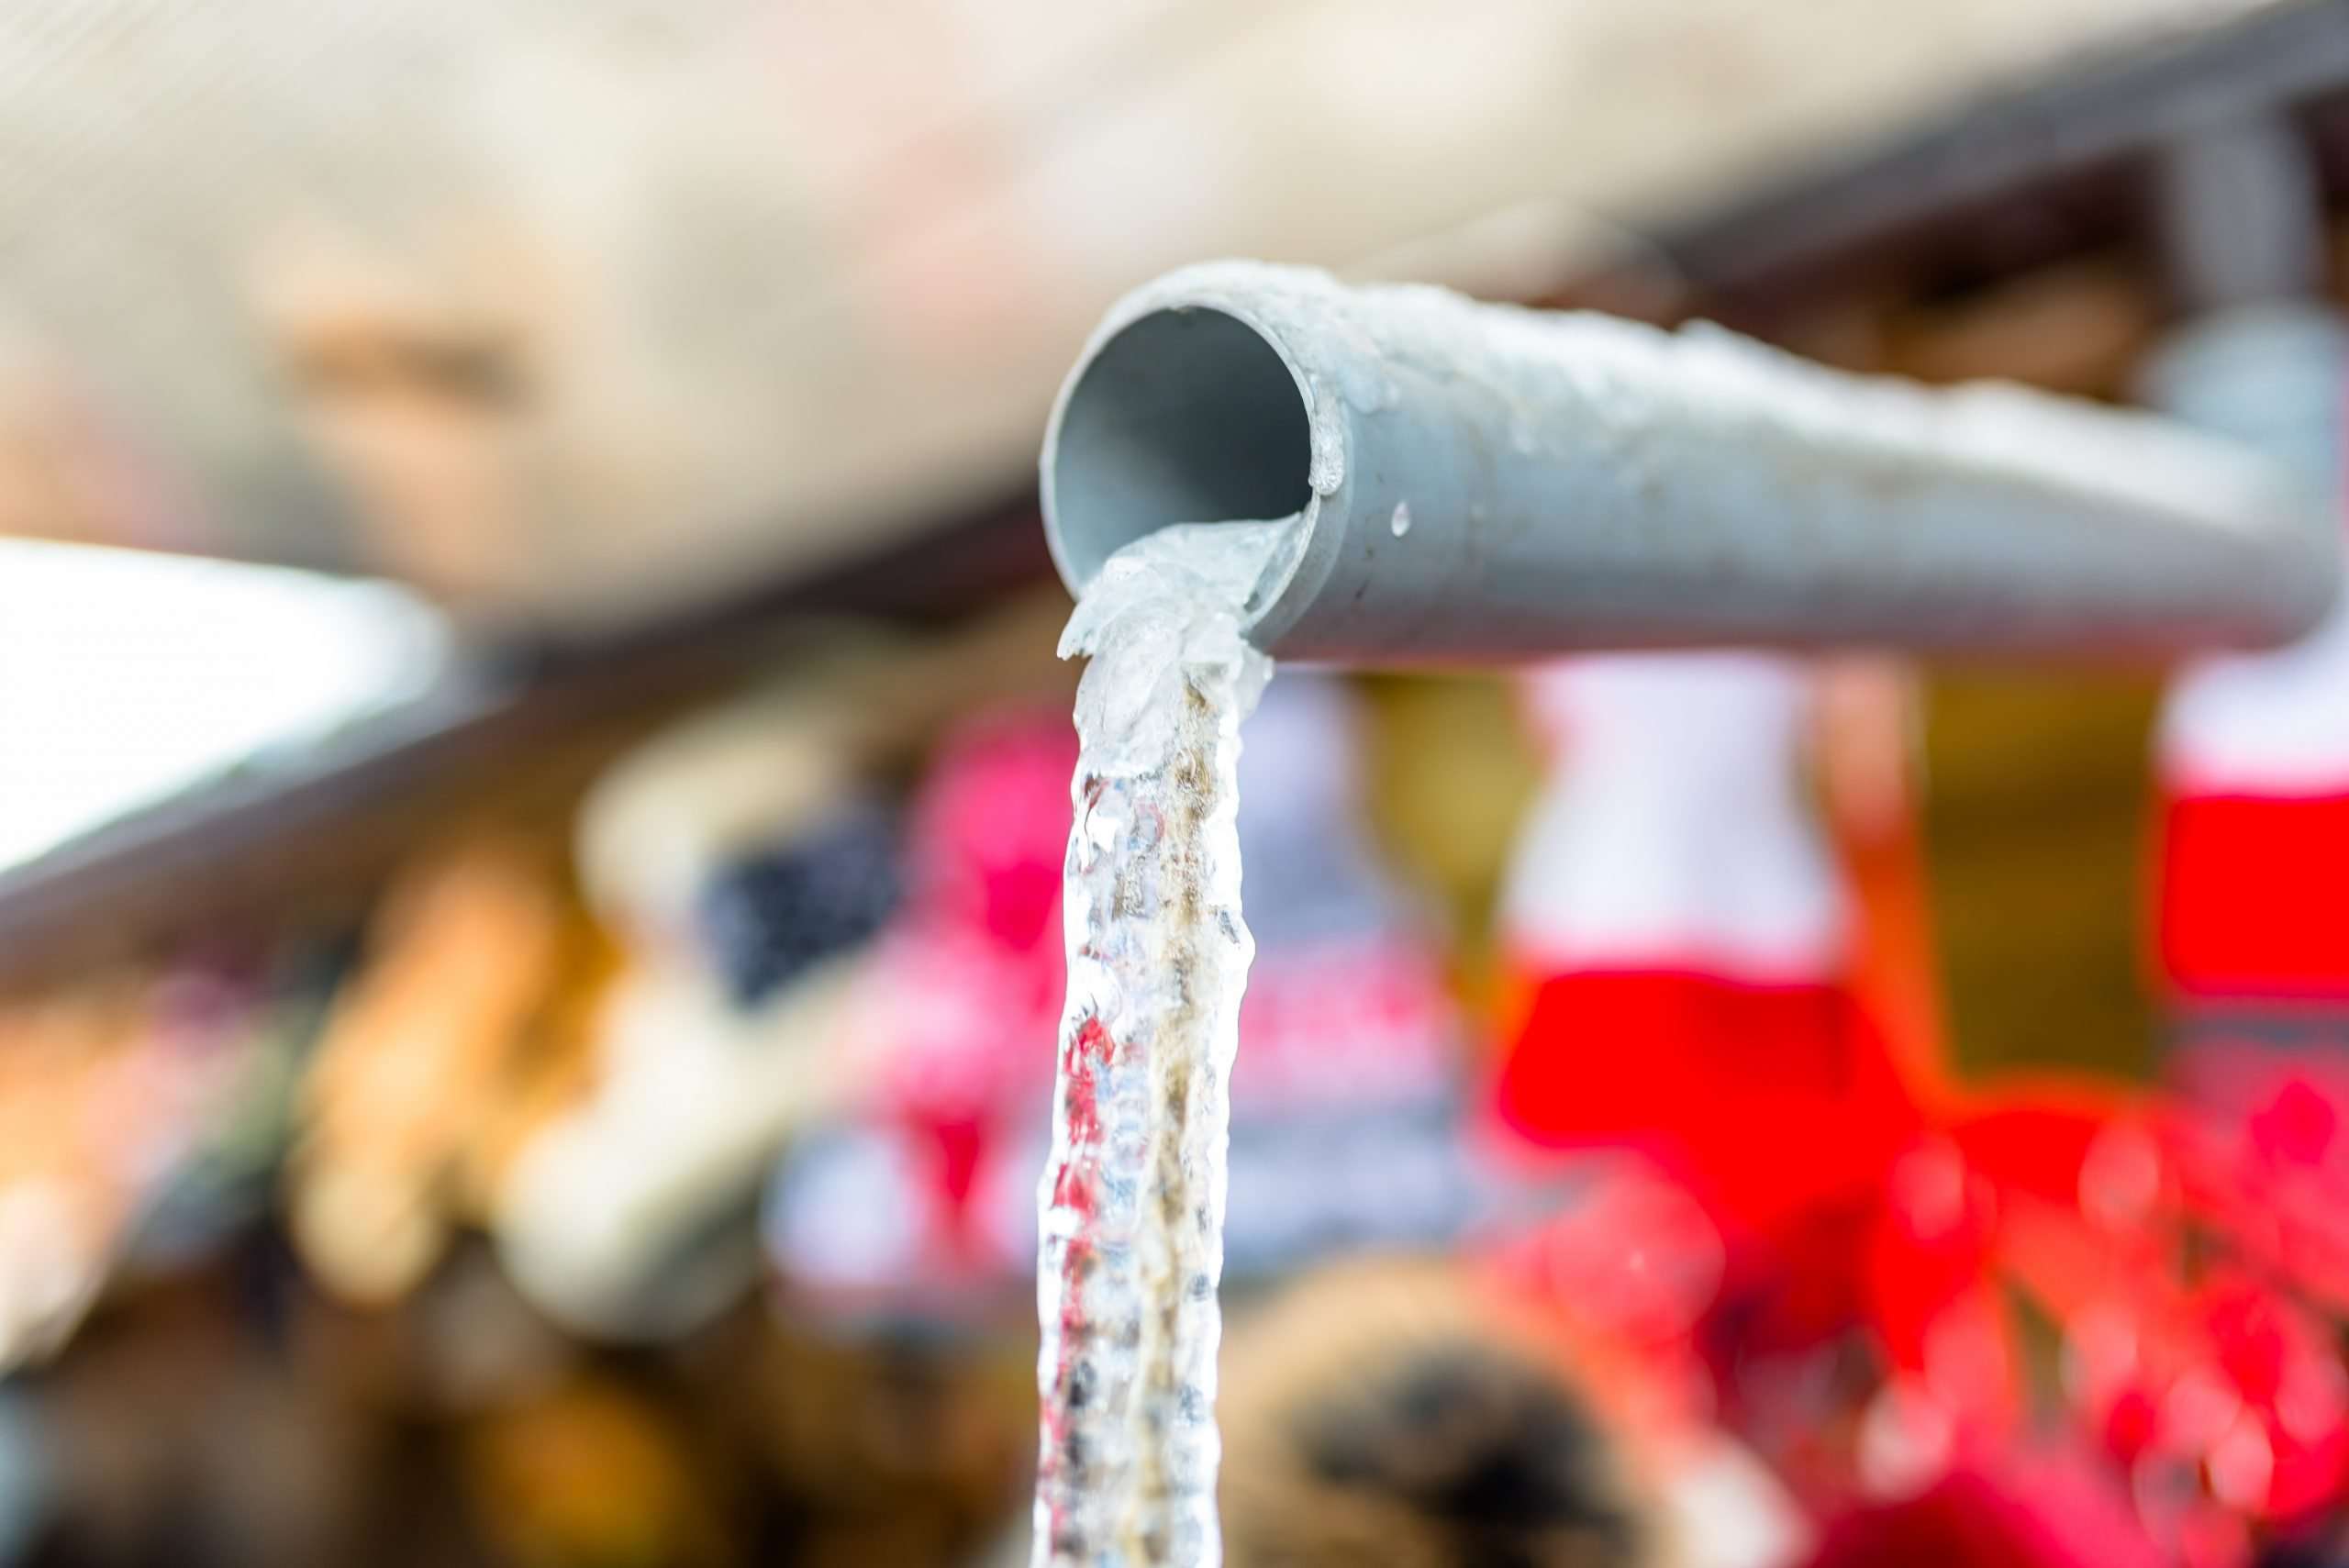 7 Tips to Keep Your RV Pipes from Freezing While Camping